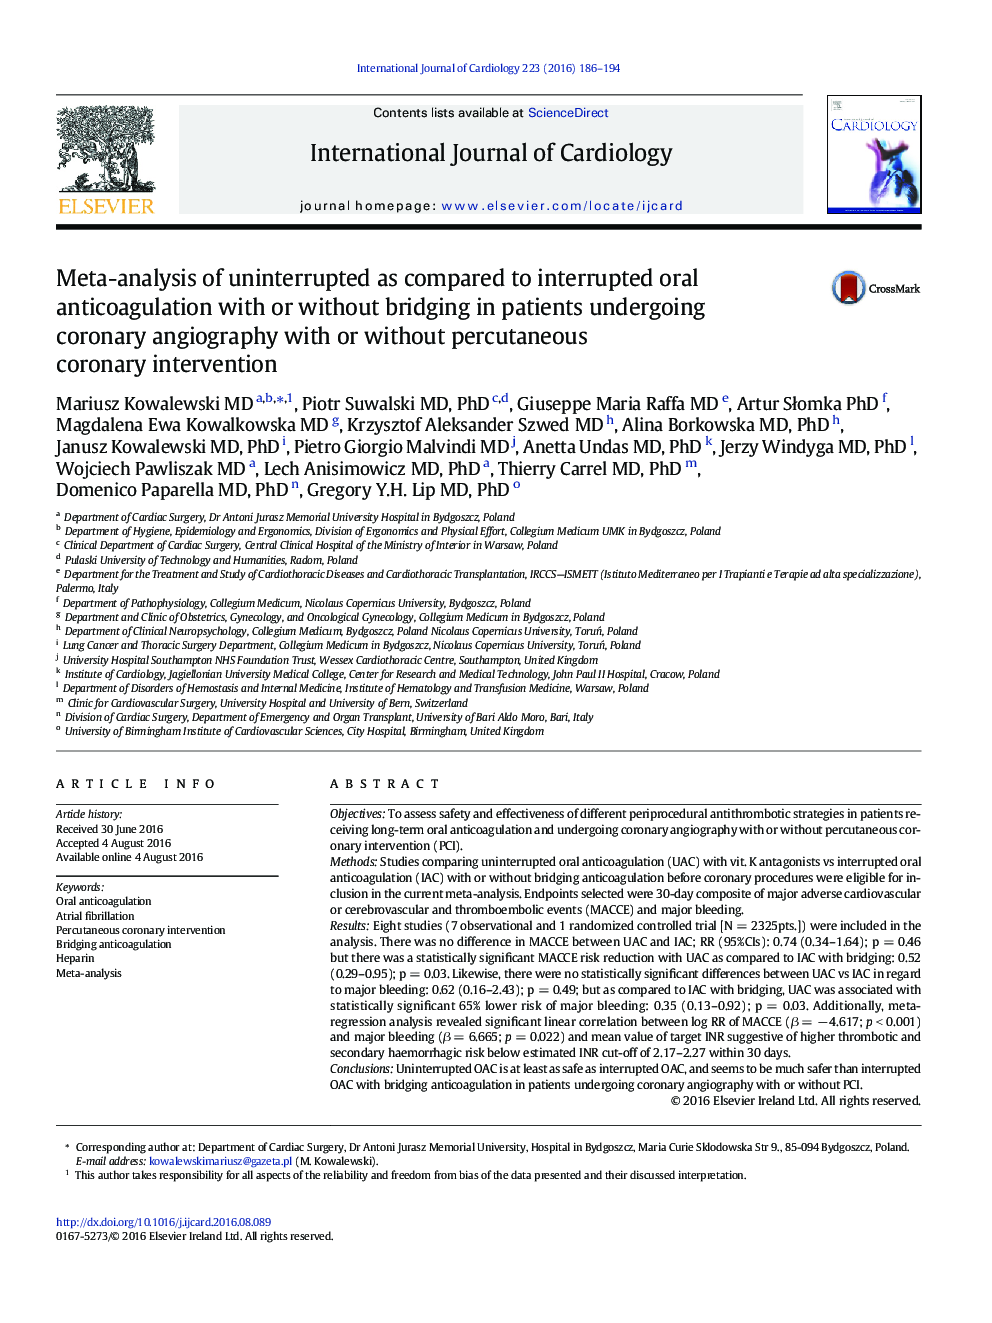 Meta-analysis of uninterrupted as compared to interrupted oral anticoagulation with or without bridging in patients undergoing coronary angiography with or without percutaneous coronary intervention